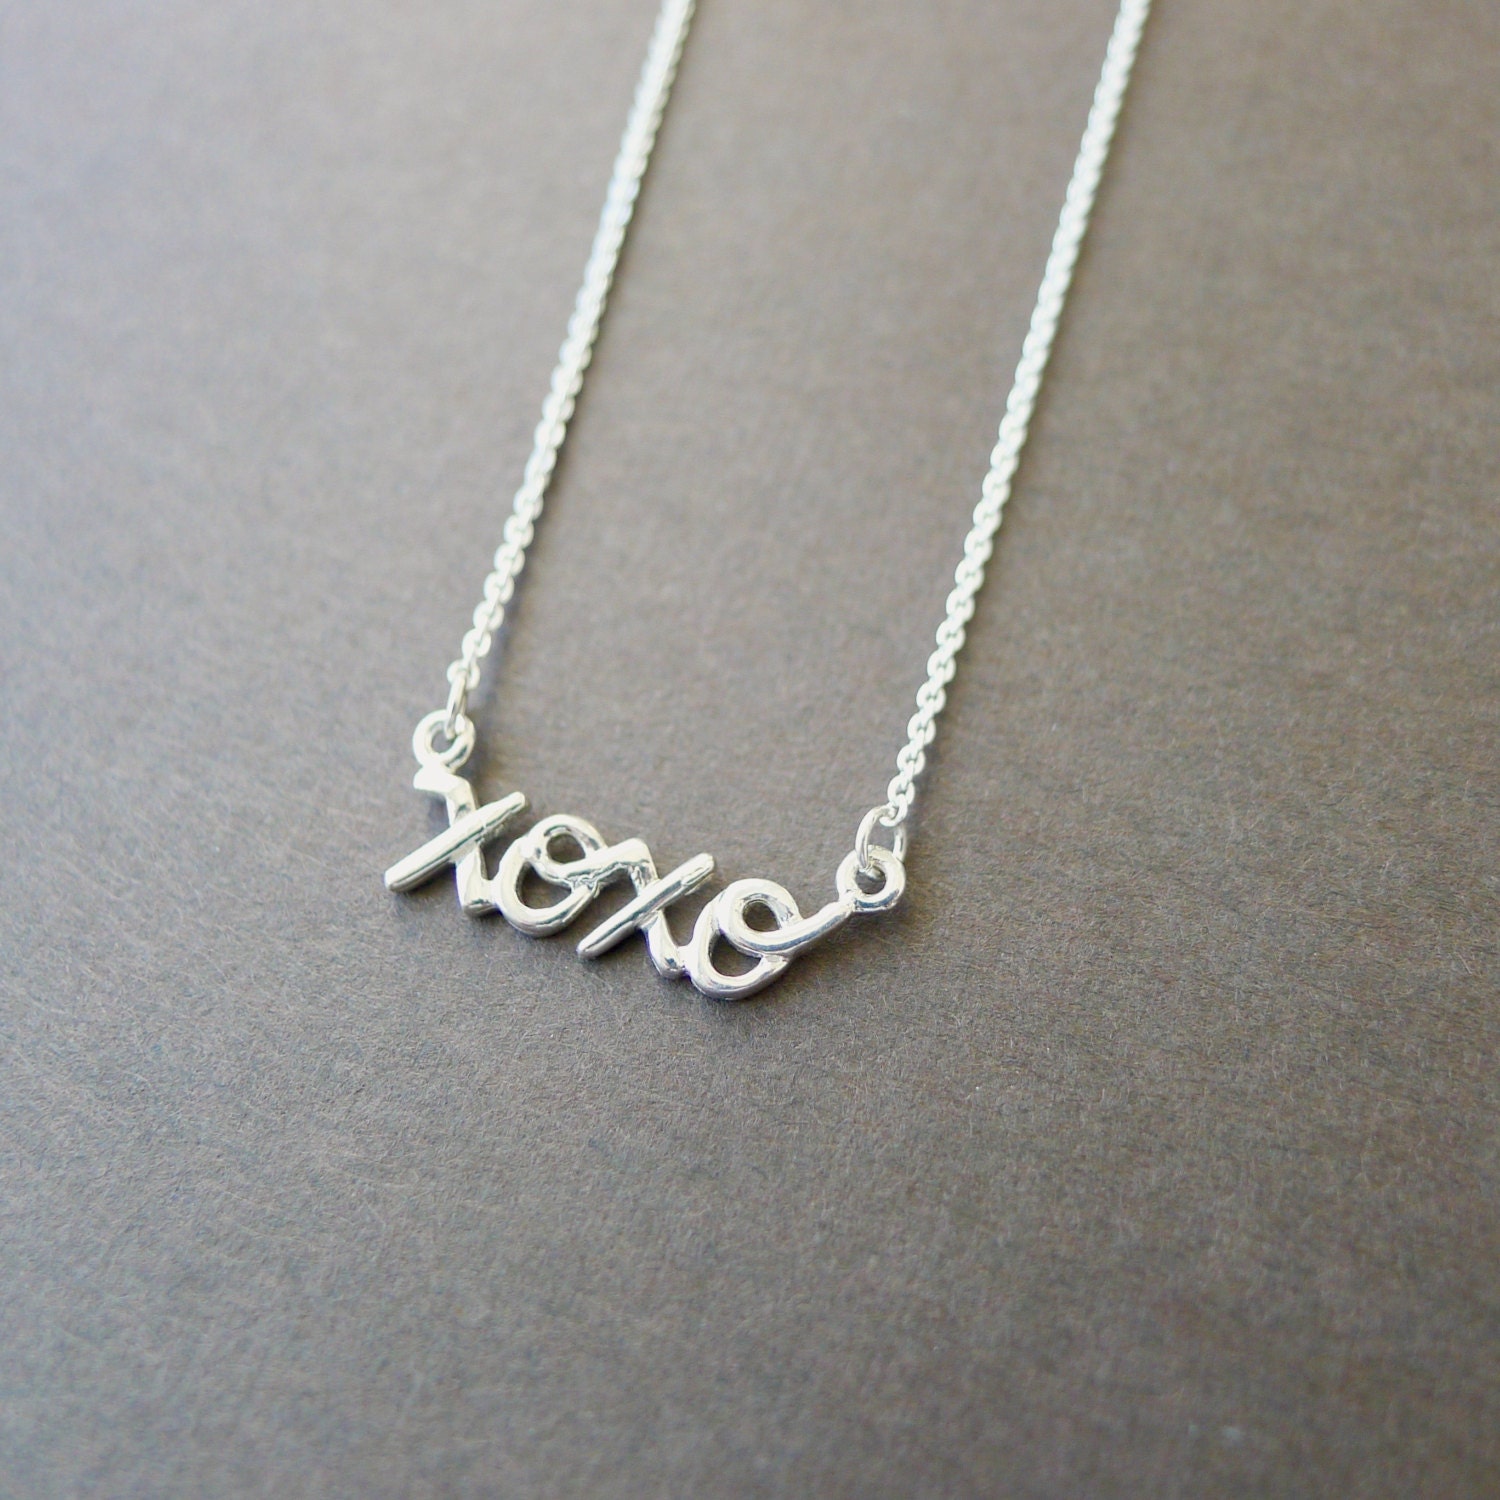 Sterling Silver XOXO Necklace, Handwritten Necklace, Love Jewelry, Hug and Kiss, XO Necklace, Gift for Mom, Push Present, Hugs and Kisses